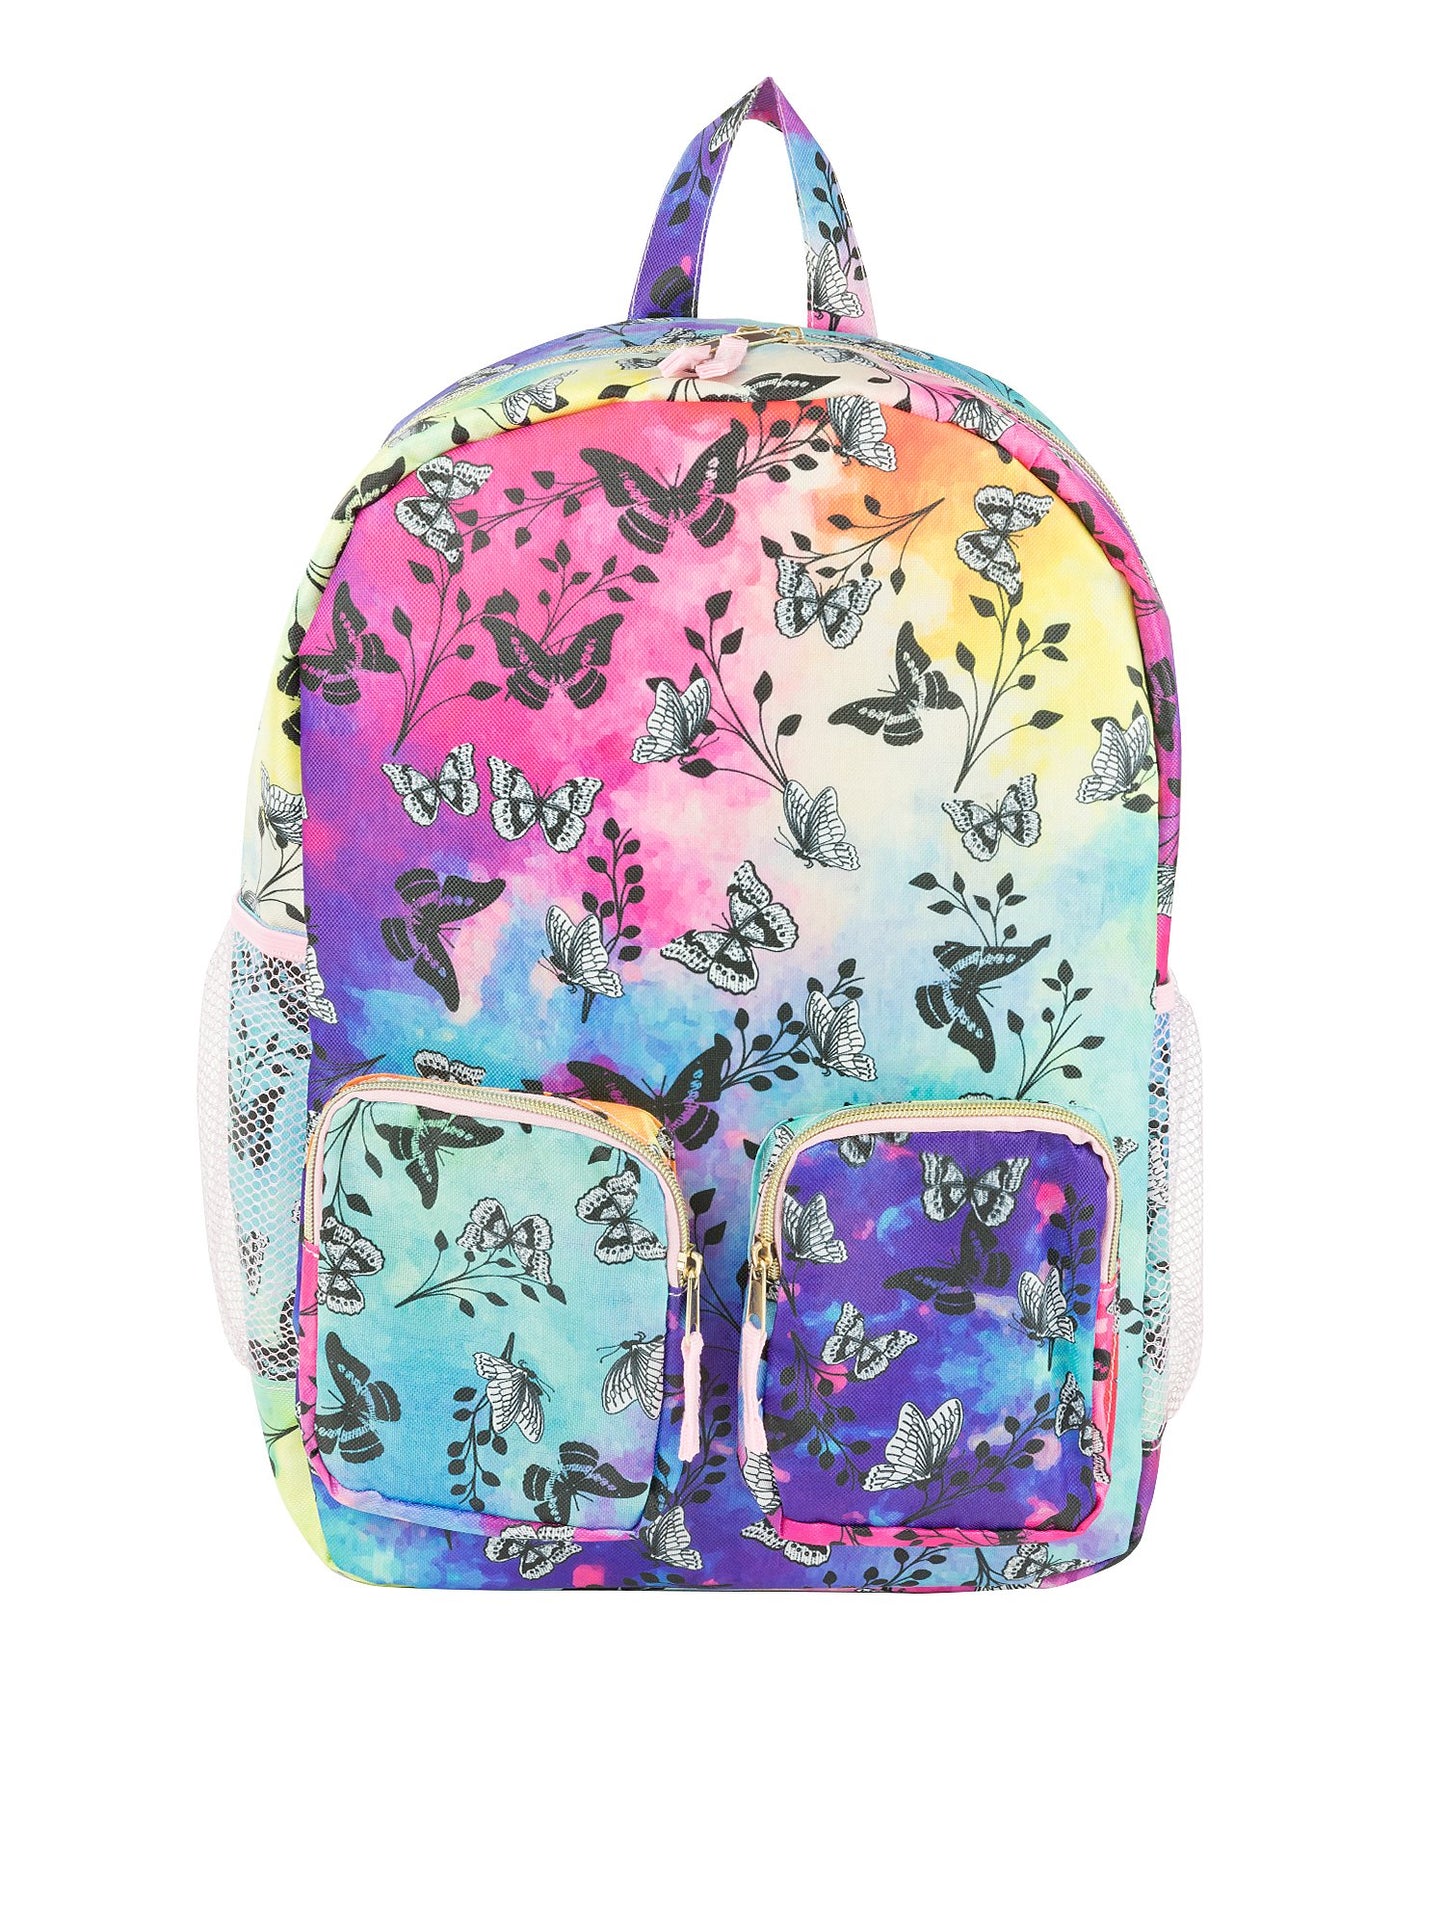 Backpack - Double Pouch w/ Side Pockets - Under1Sky